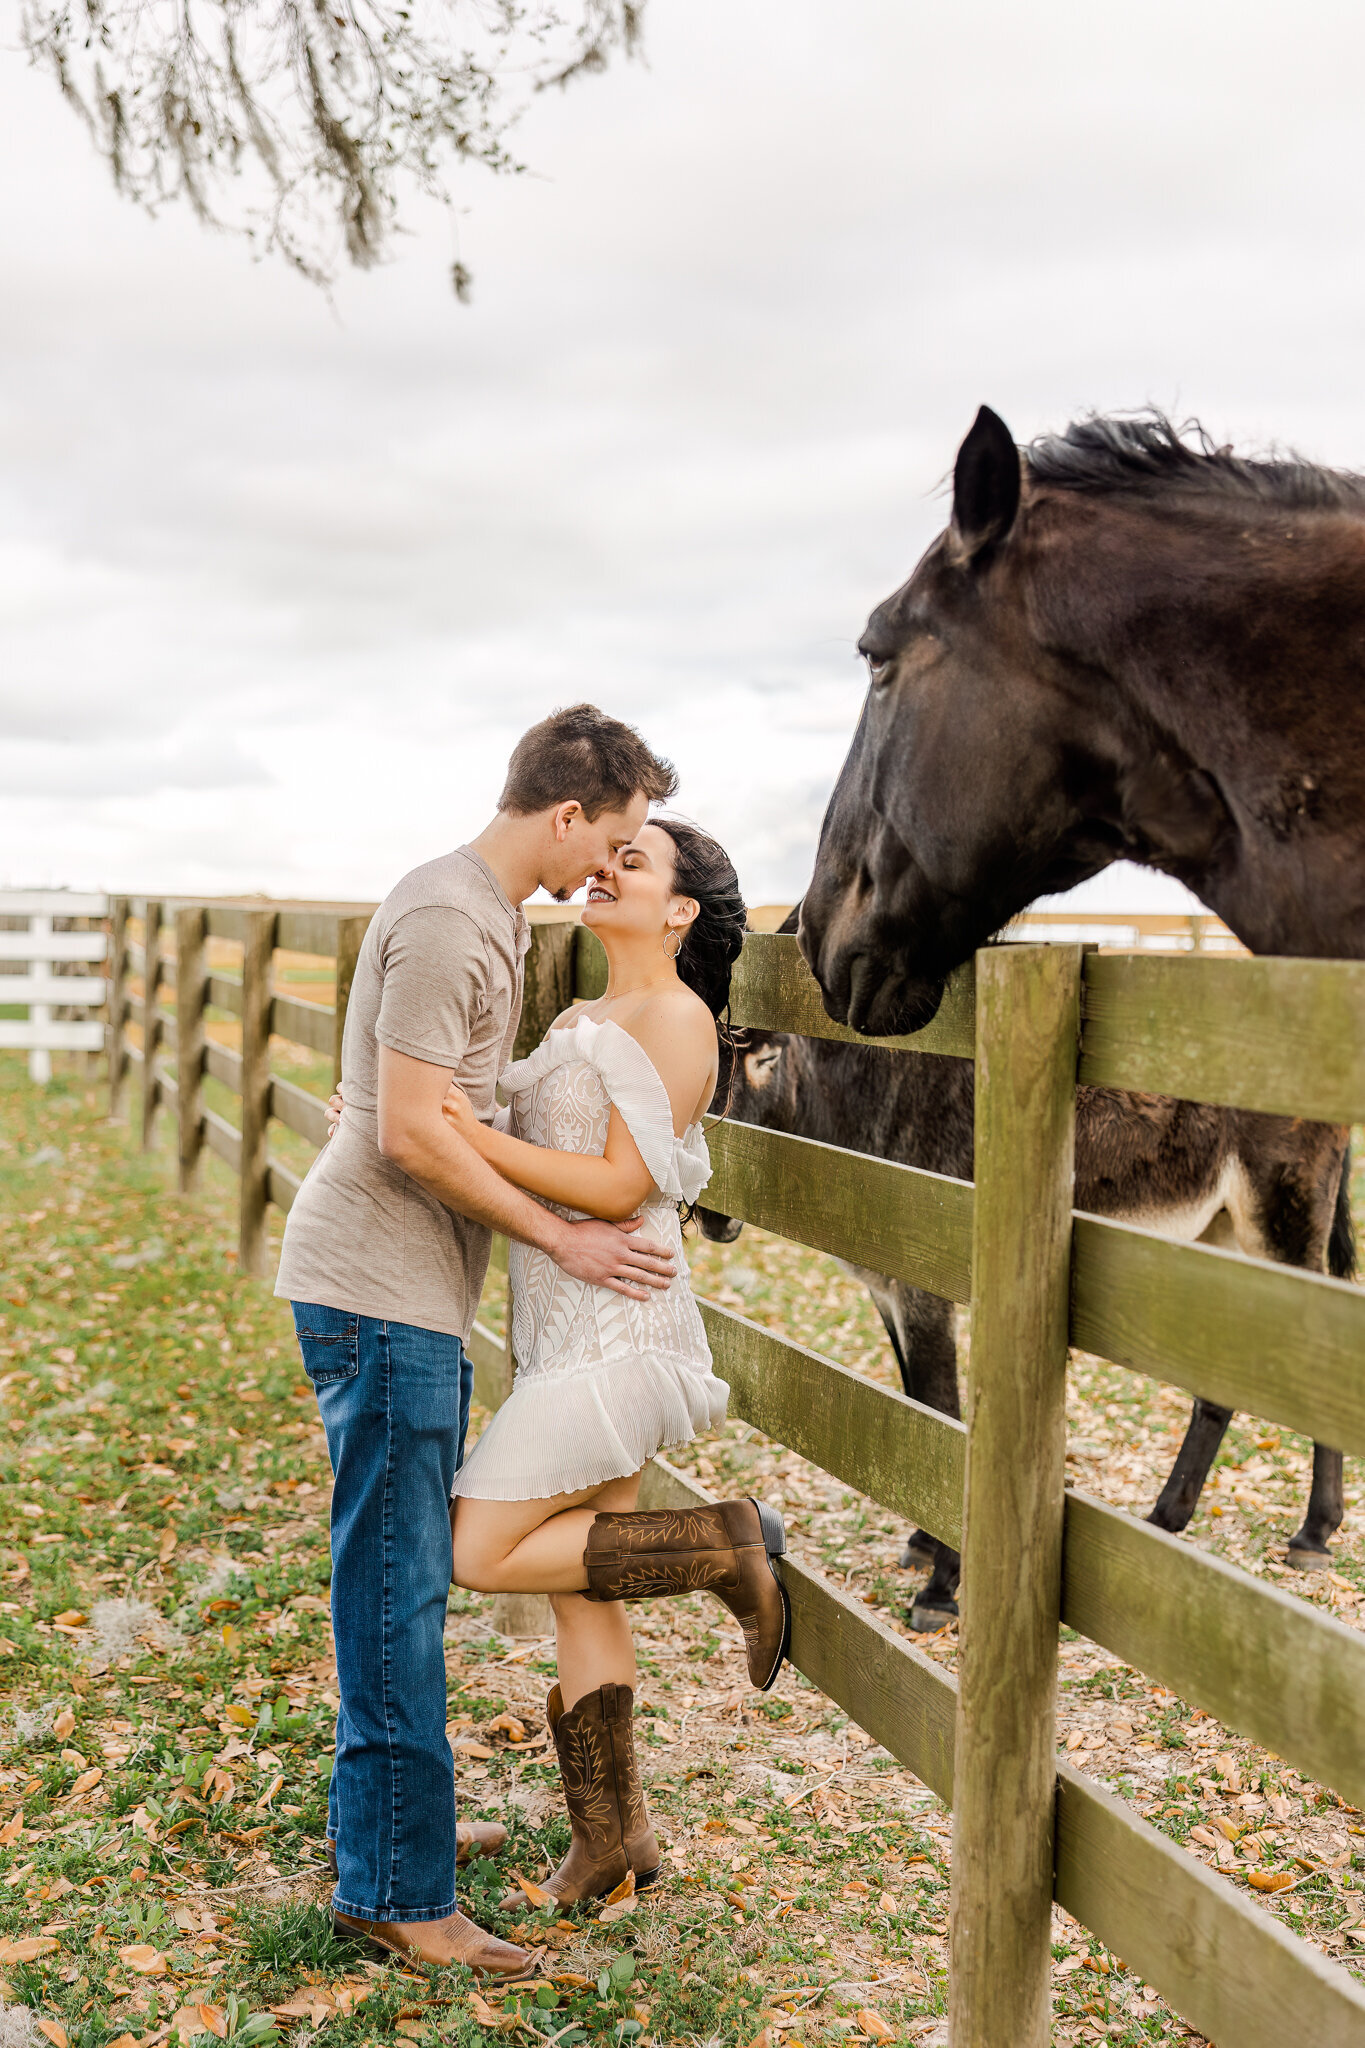 A woman is against a fence almost kissing a man as a horse looks at them